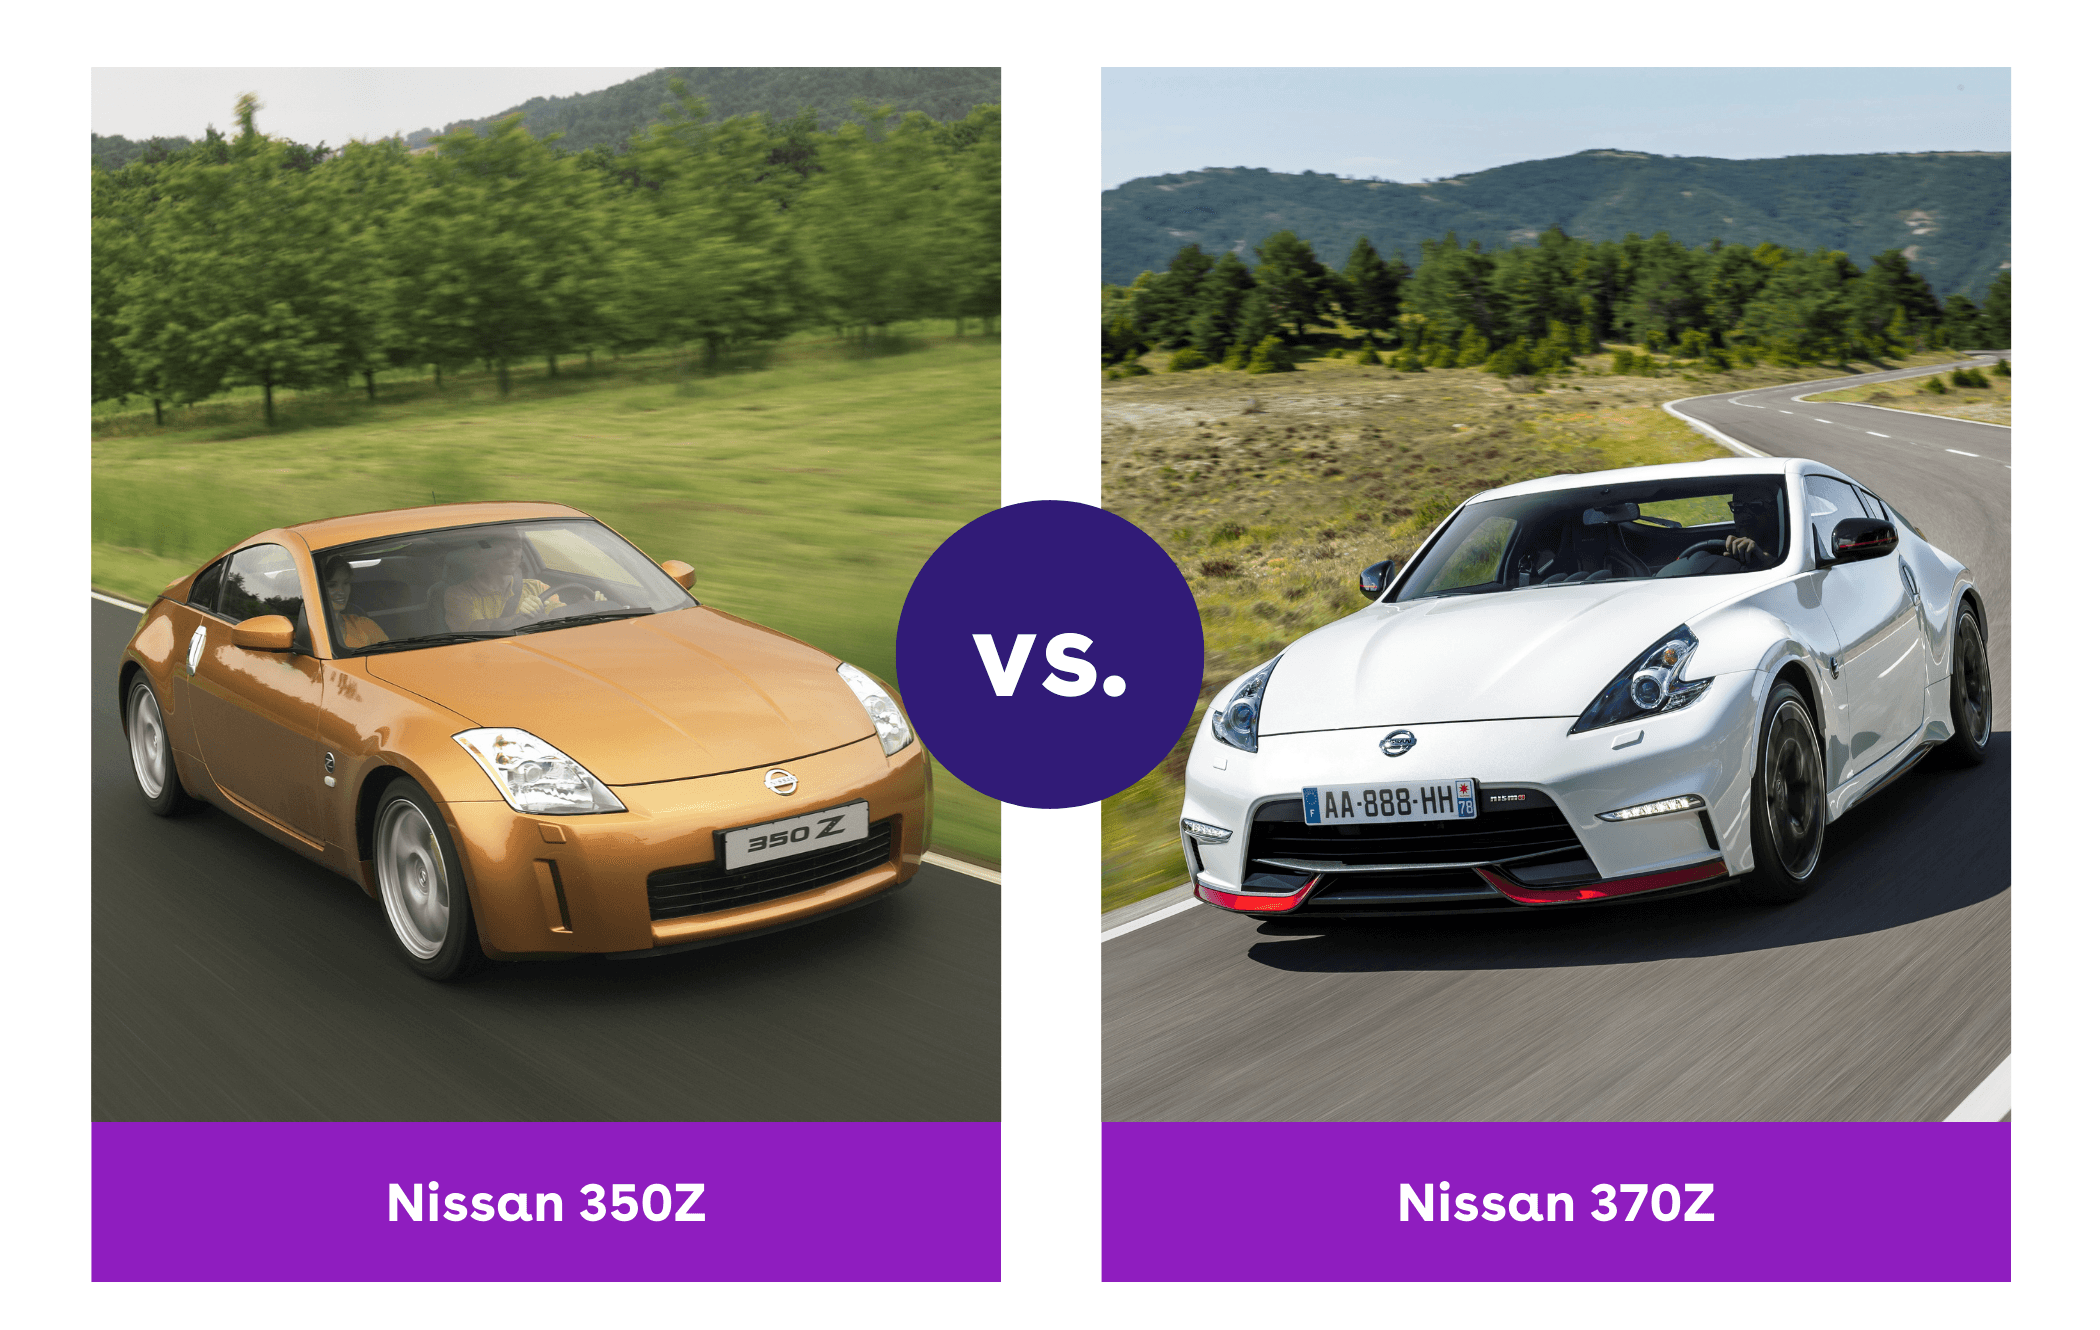 Side-by-side image of Nissan 350Z and Nissan 370Z driving